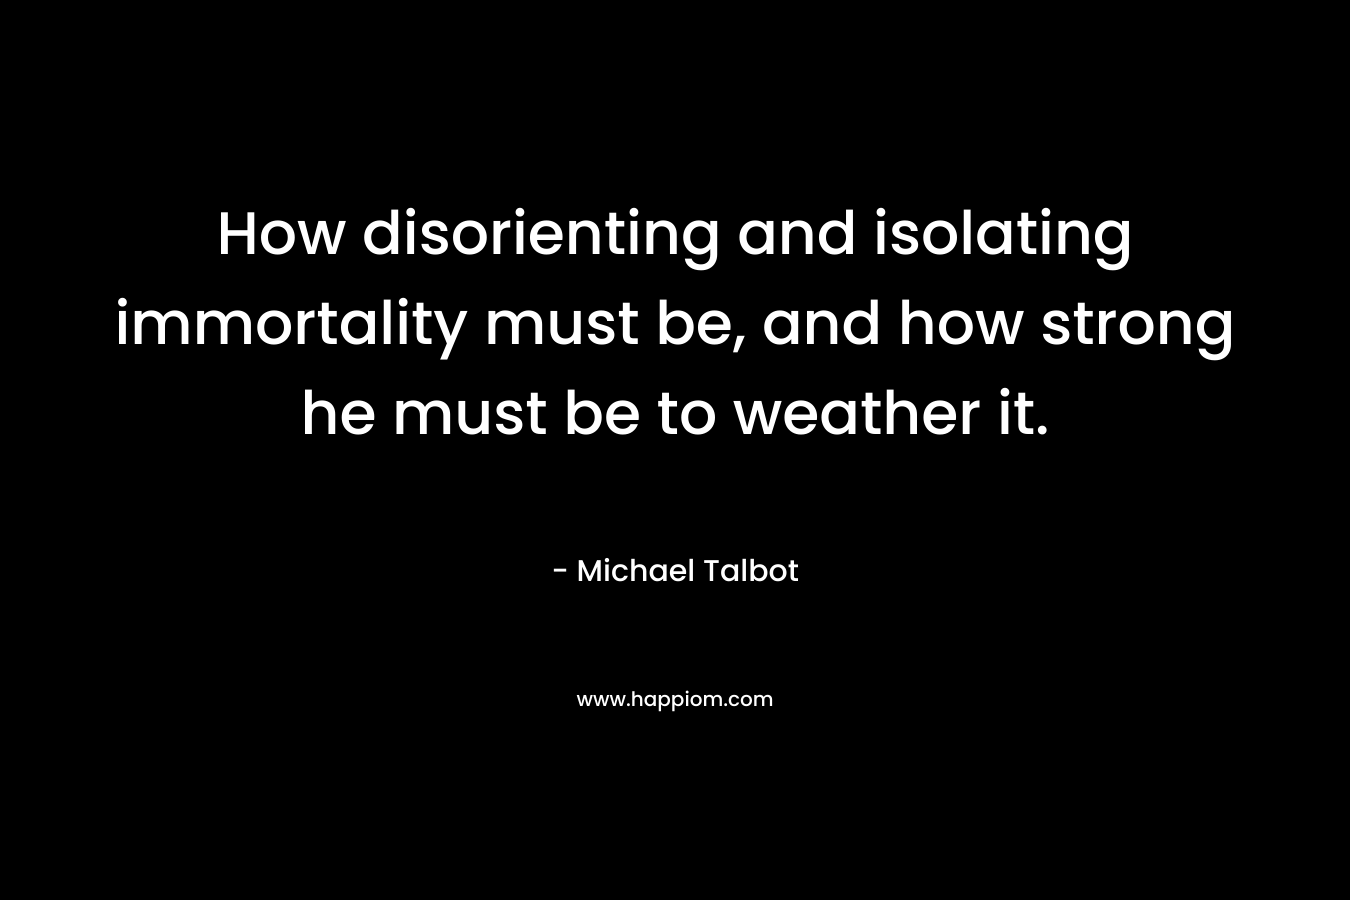 How disorienting and isolating immortality must be, and how strong he must be to weather it.